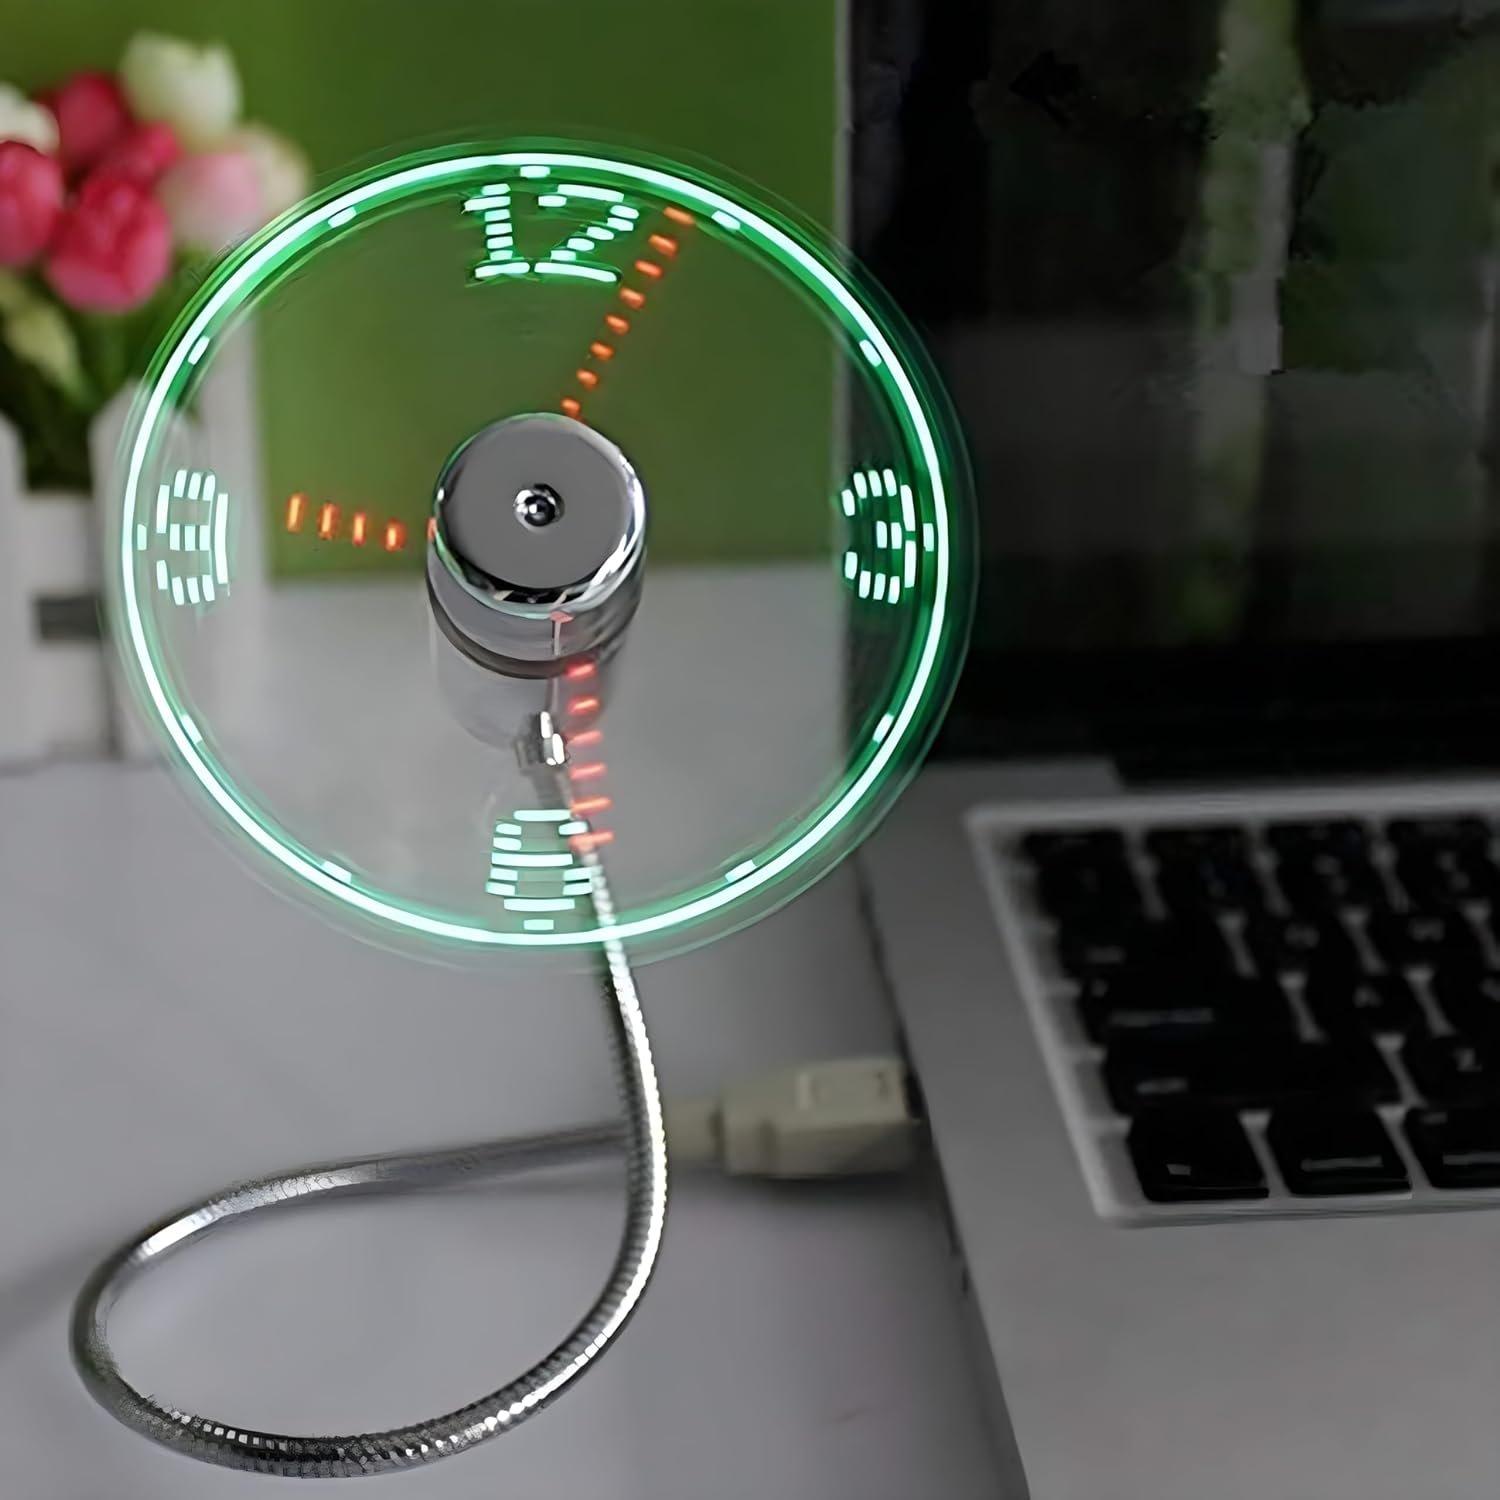 ONXE LED USB Clock Fan with Real Time Display Function